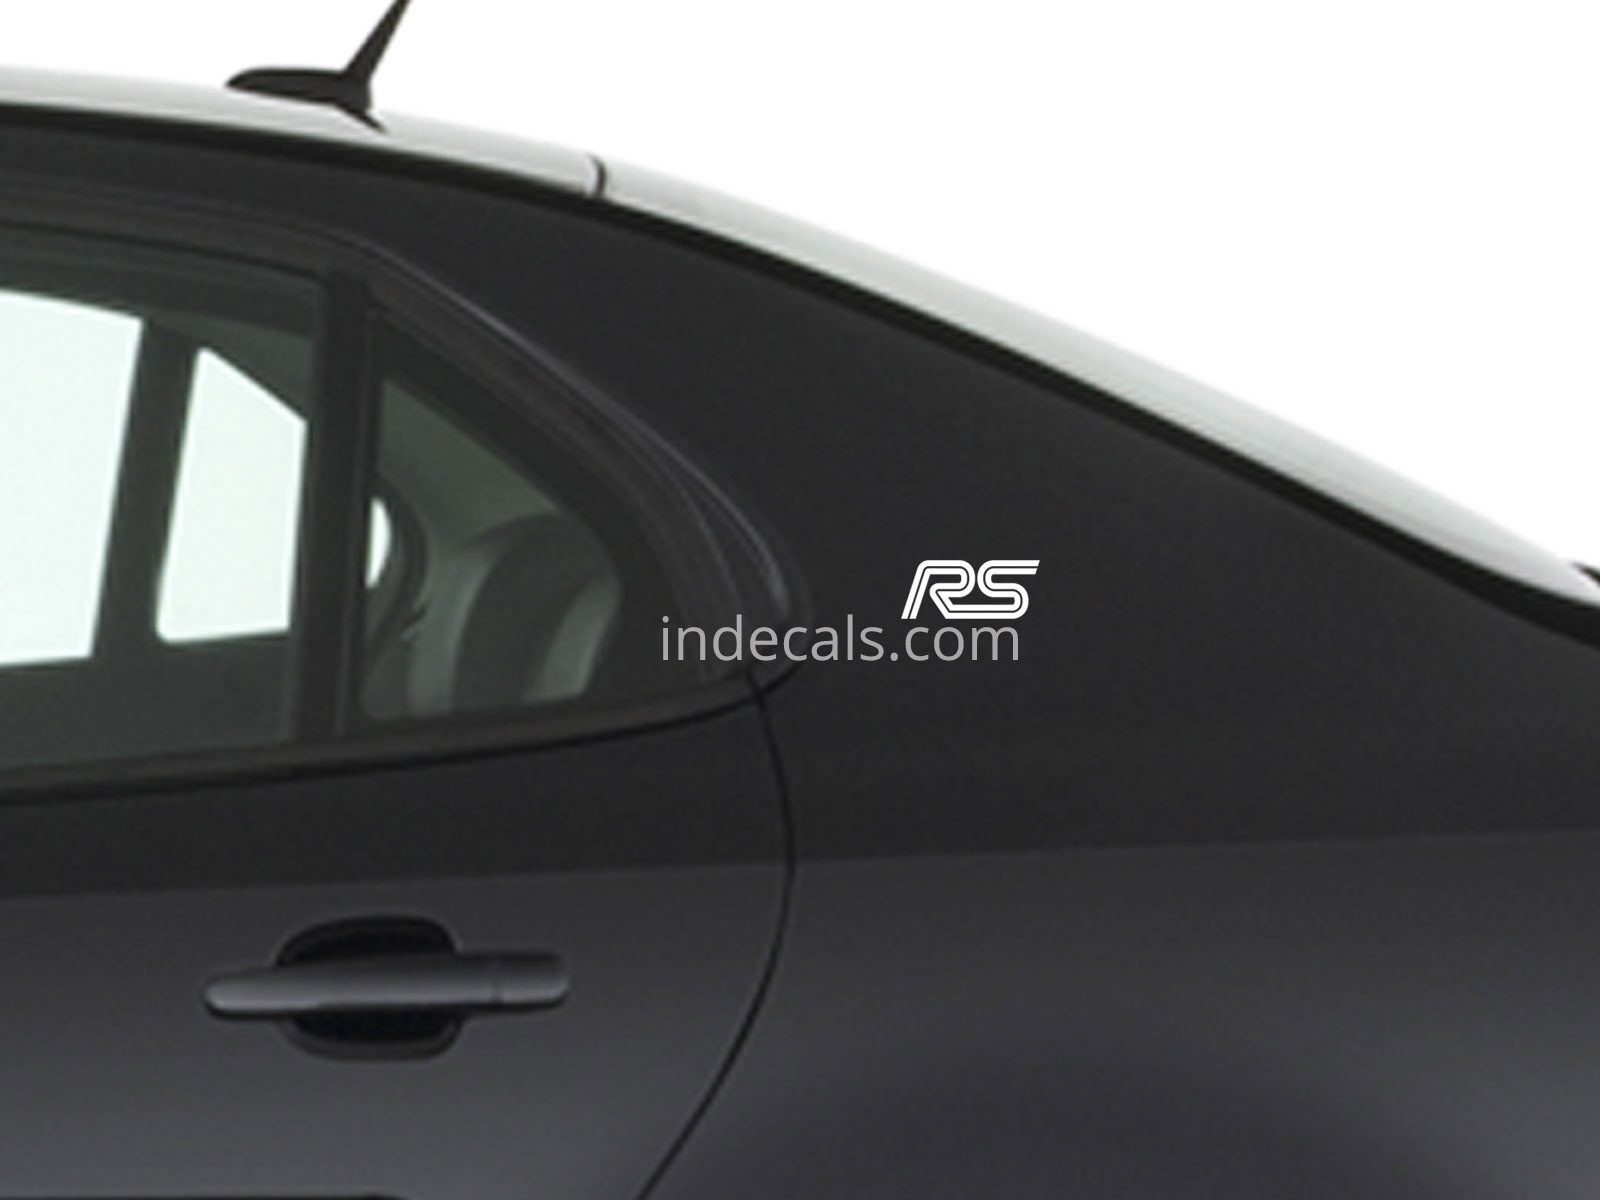 3 x Ford RS Stickers for Rear Wing - White